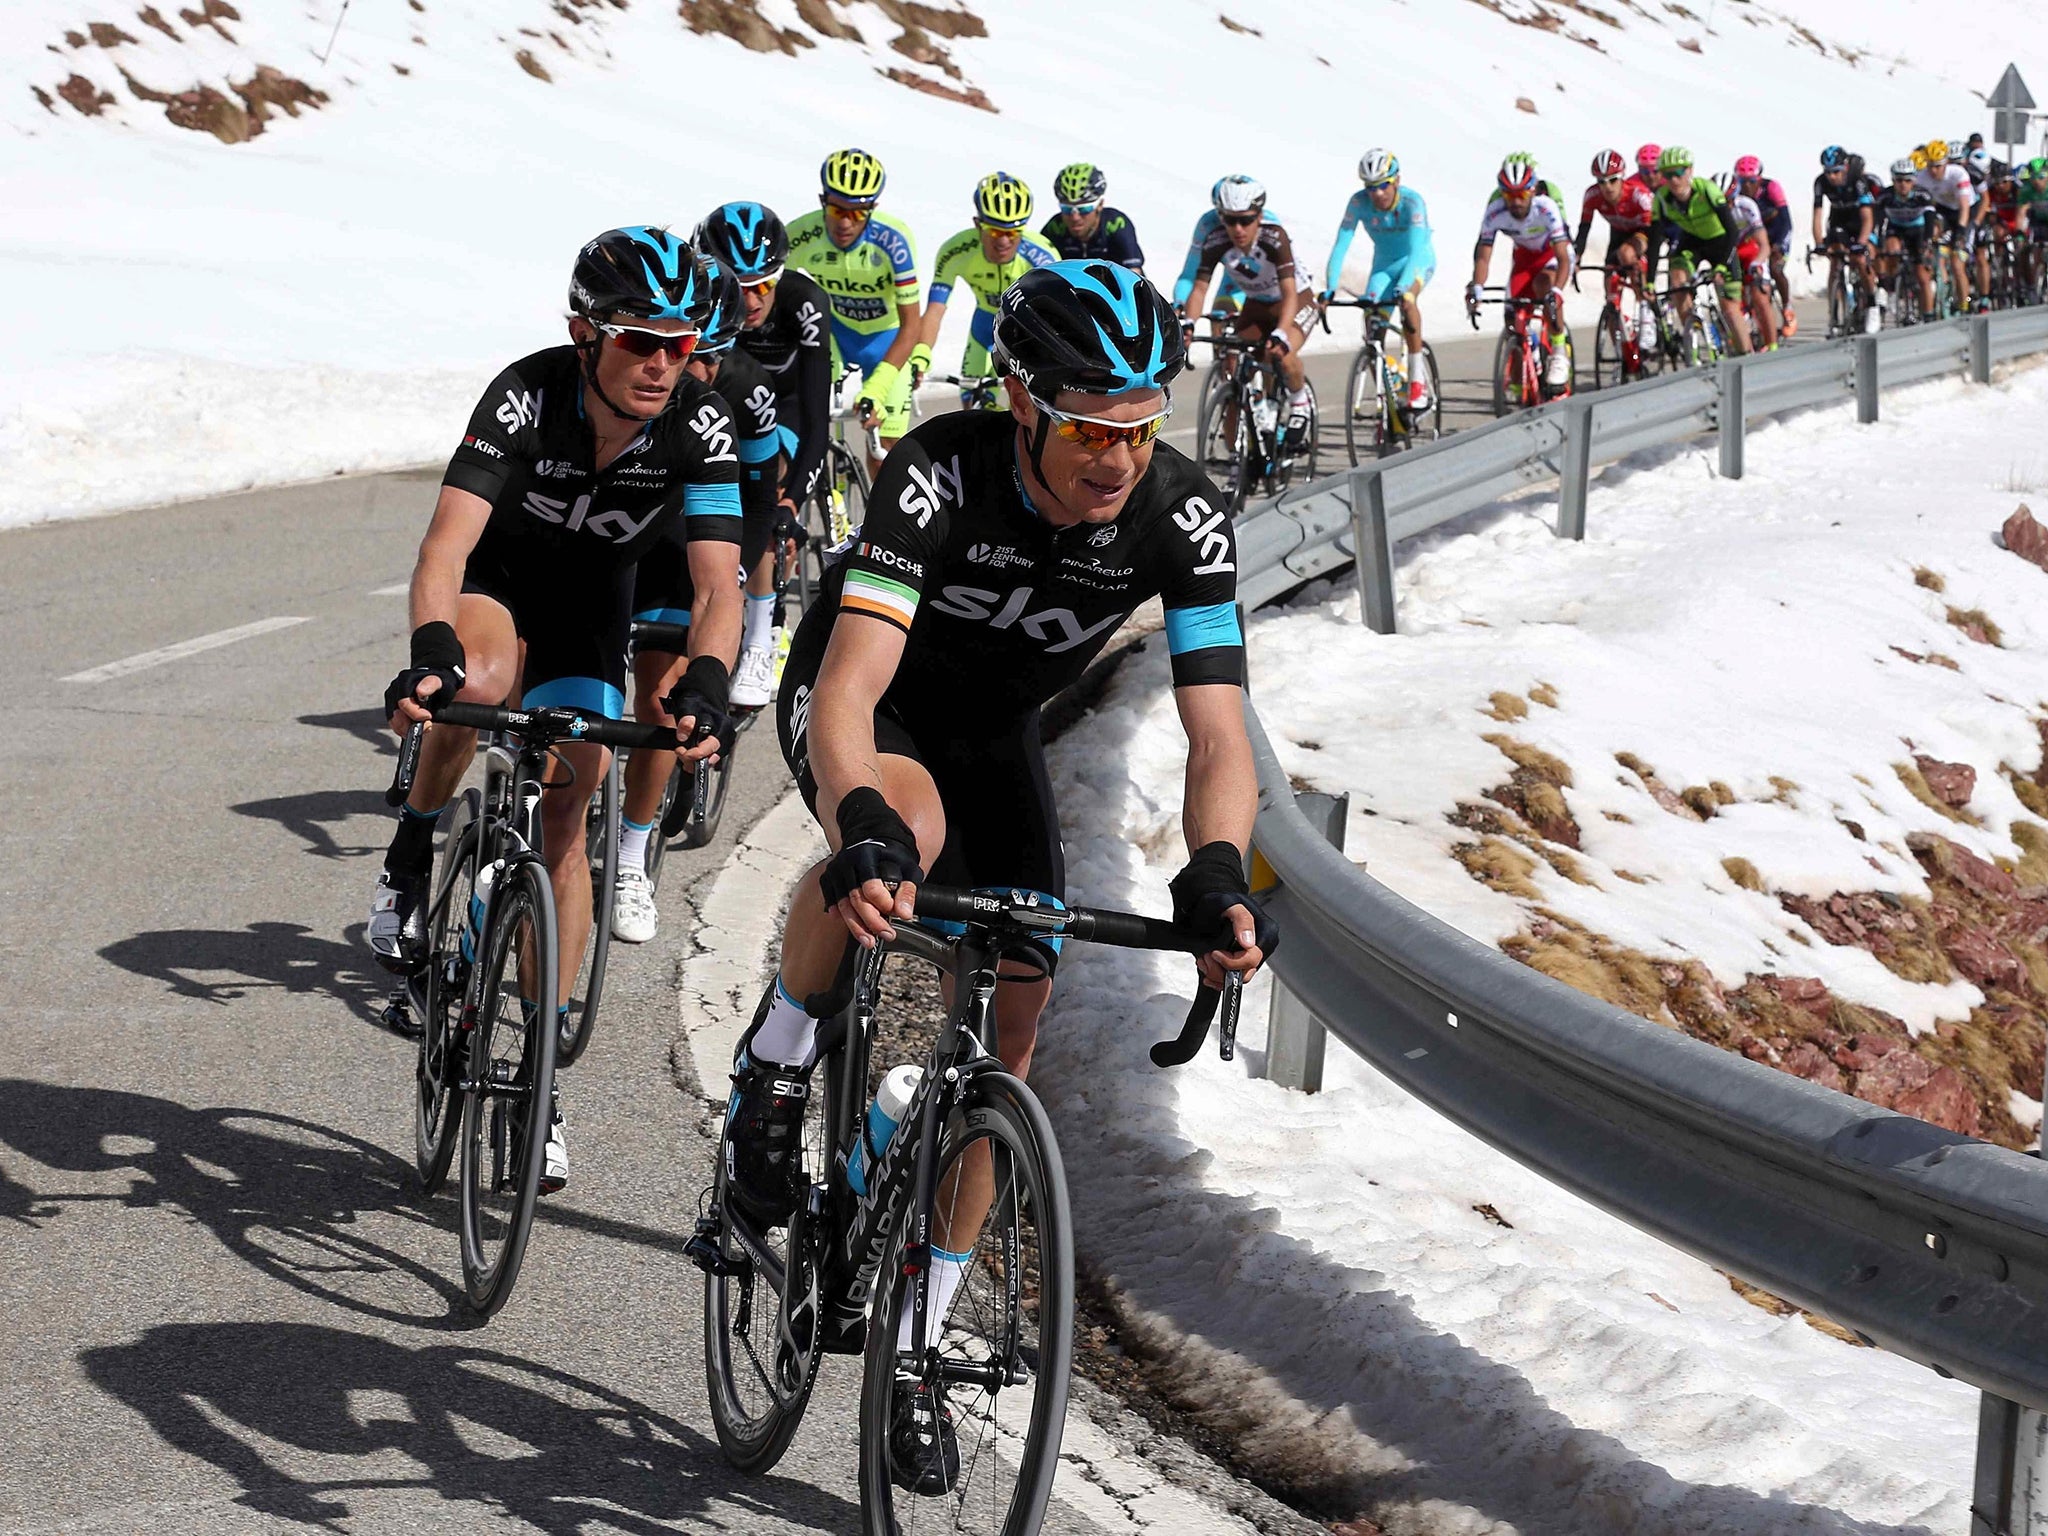 Australian Richie Porte (second right), of Team Sky, in
action during yesterday’s fourth stage in La Molina,
Catalonia